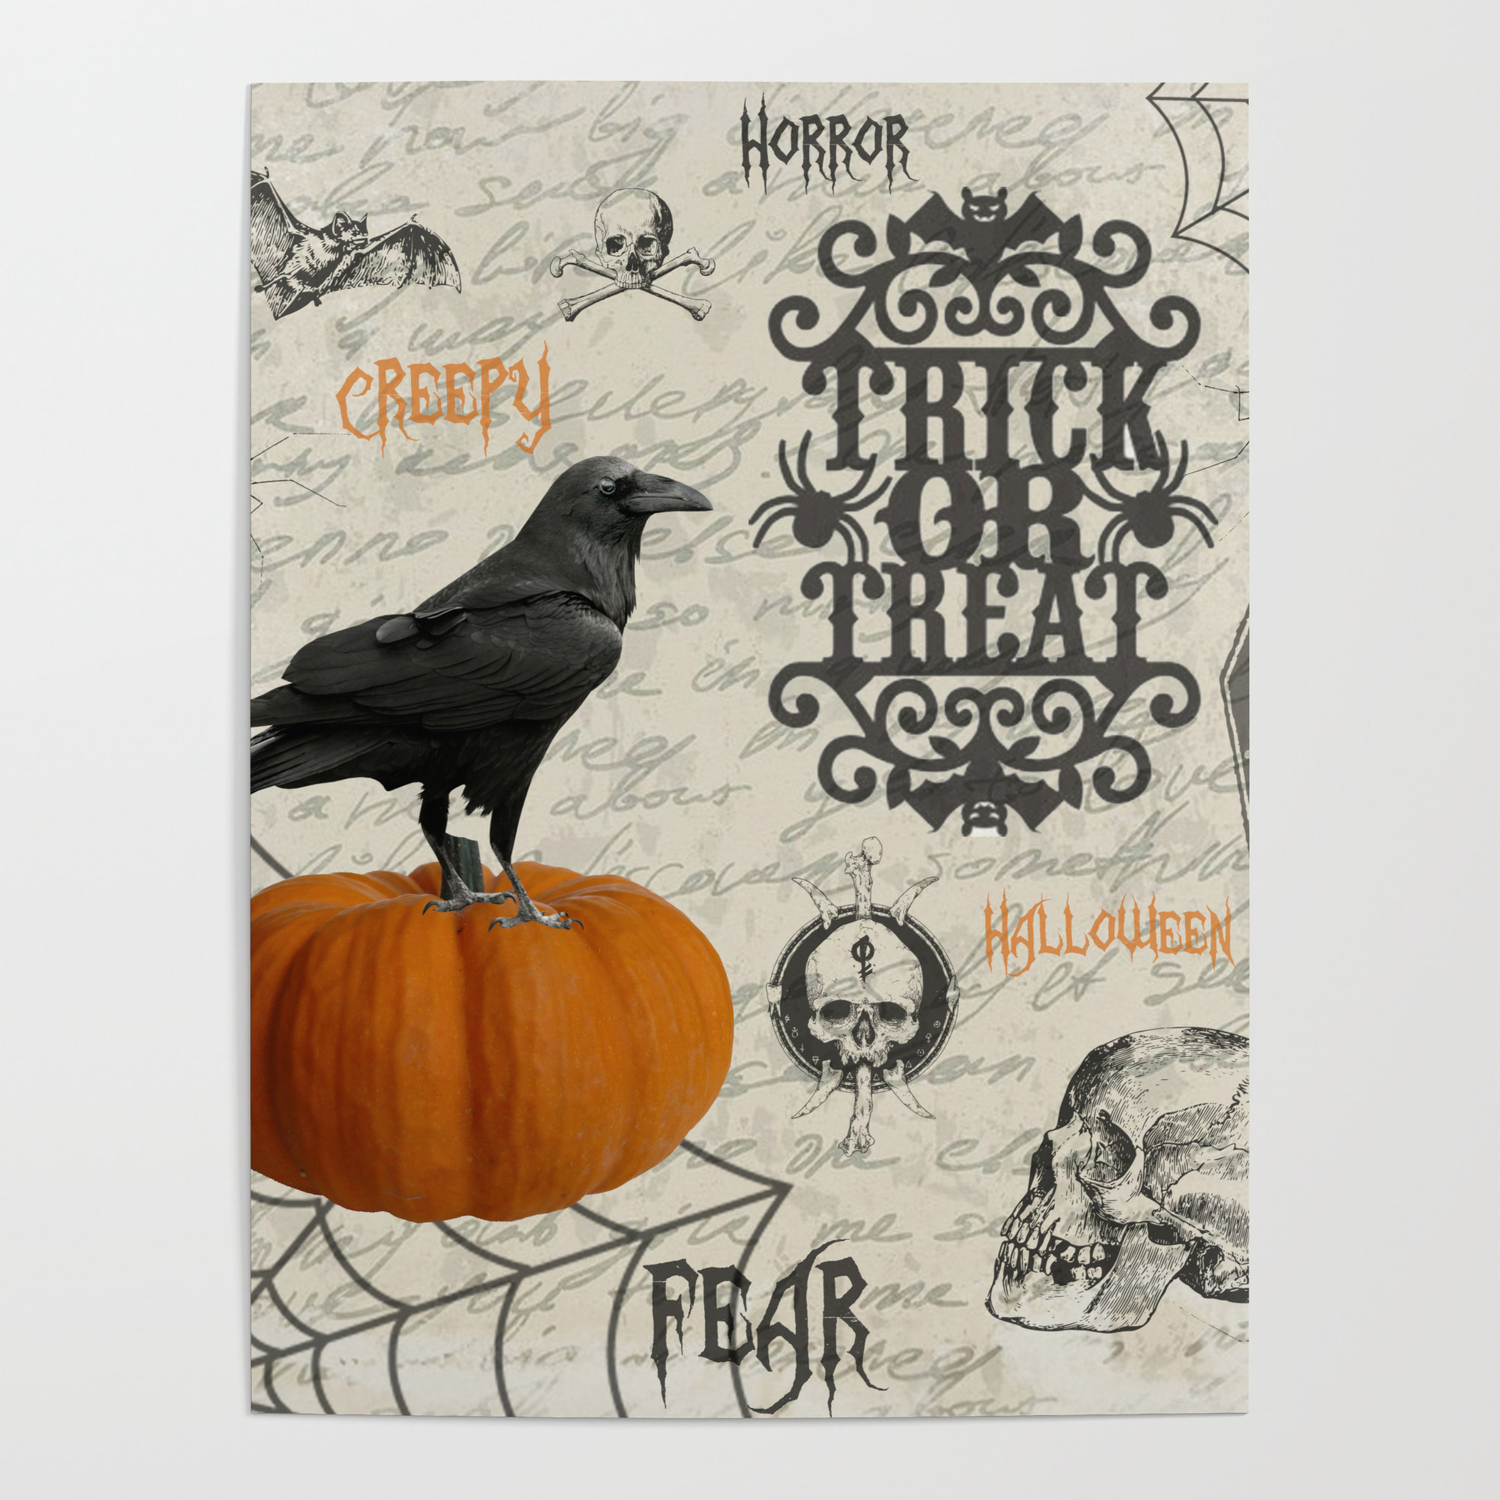 Vintage Halloween Graphic Poster #48-3 Sizes Available 